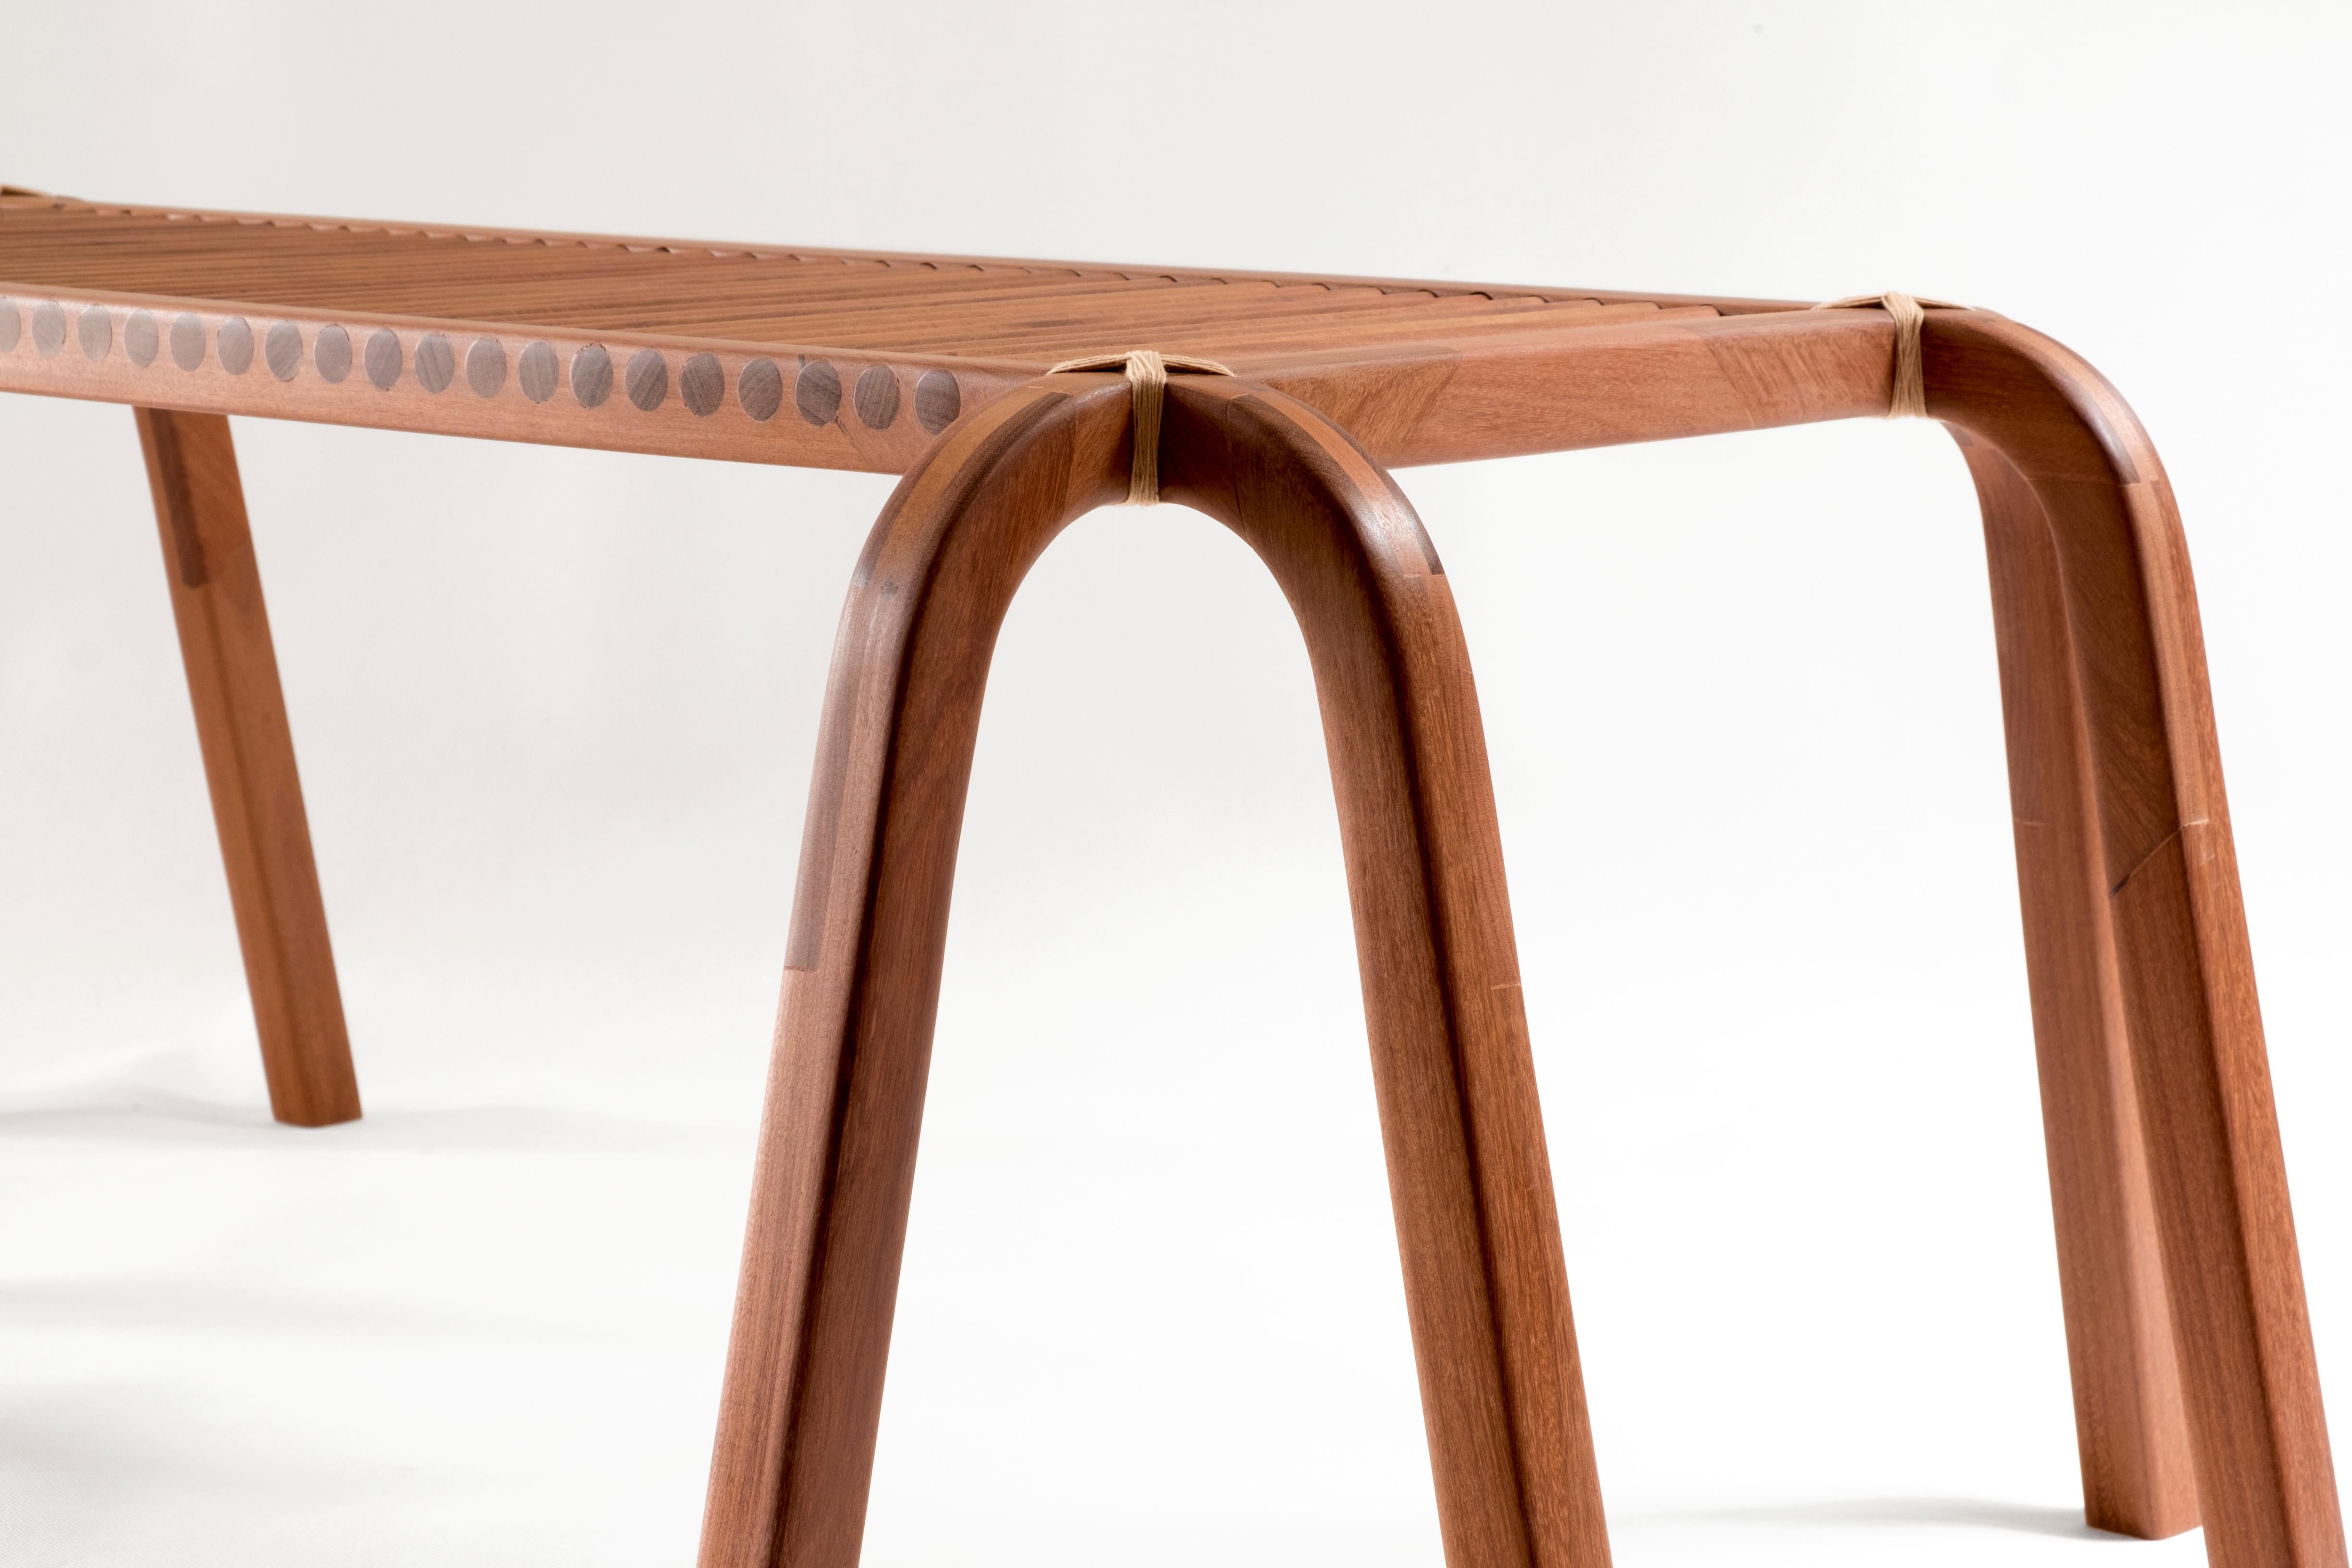 Woodwork Embira Bench: made in Brazil with pink jequitba wood and natural dyed yarns For Sale